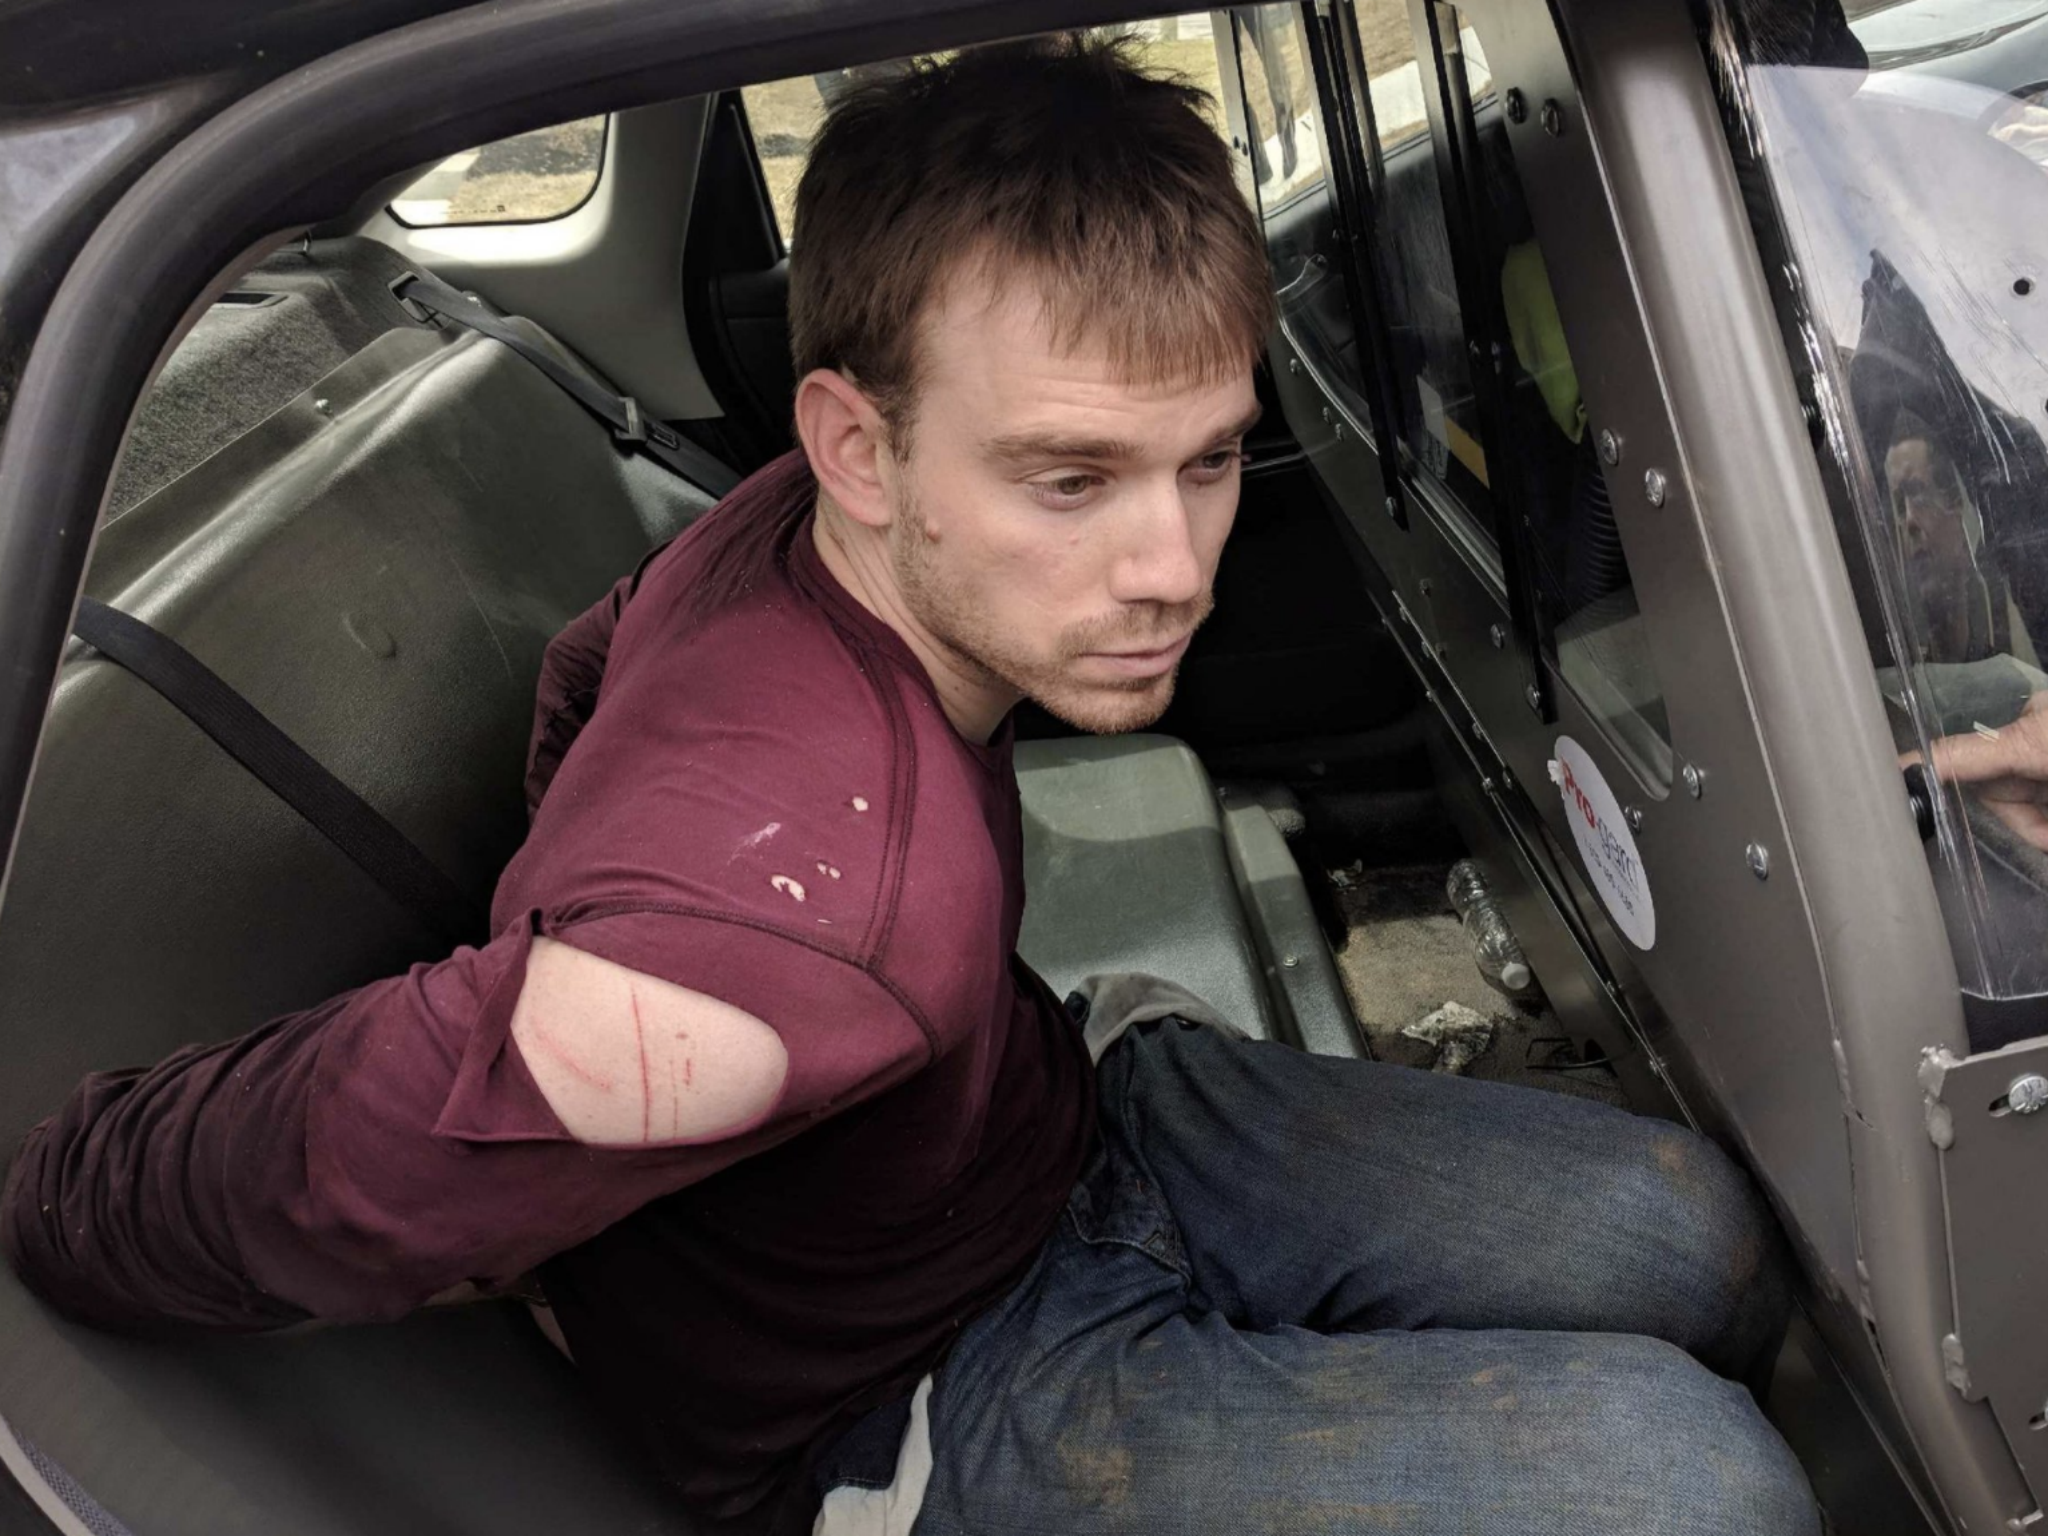 Police said they apprehended shooting suspect Travis Reinking in a wooded area